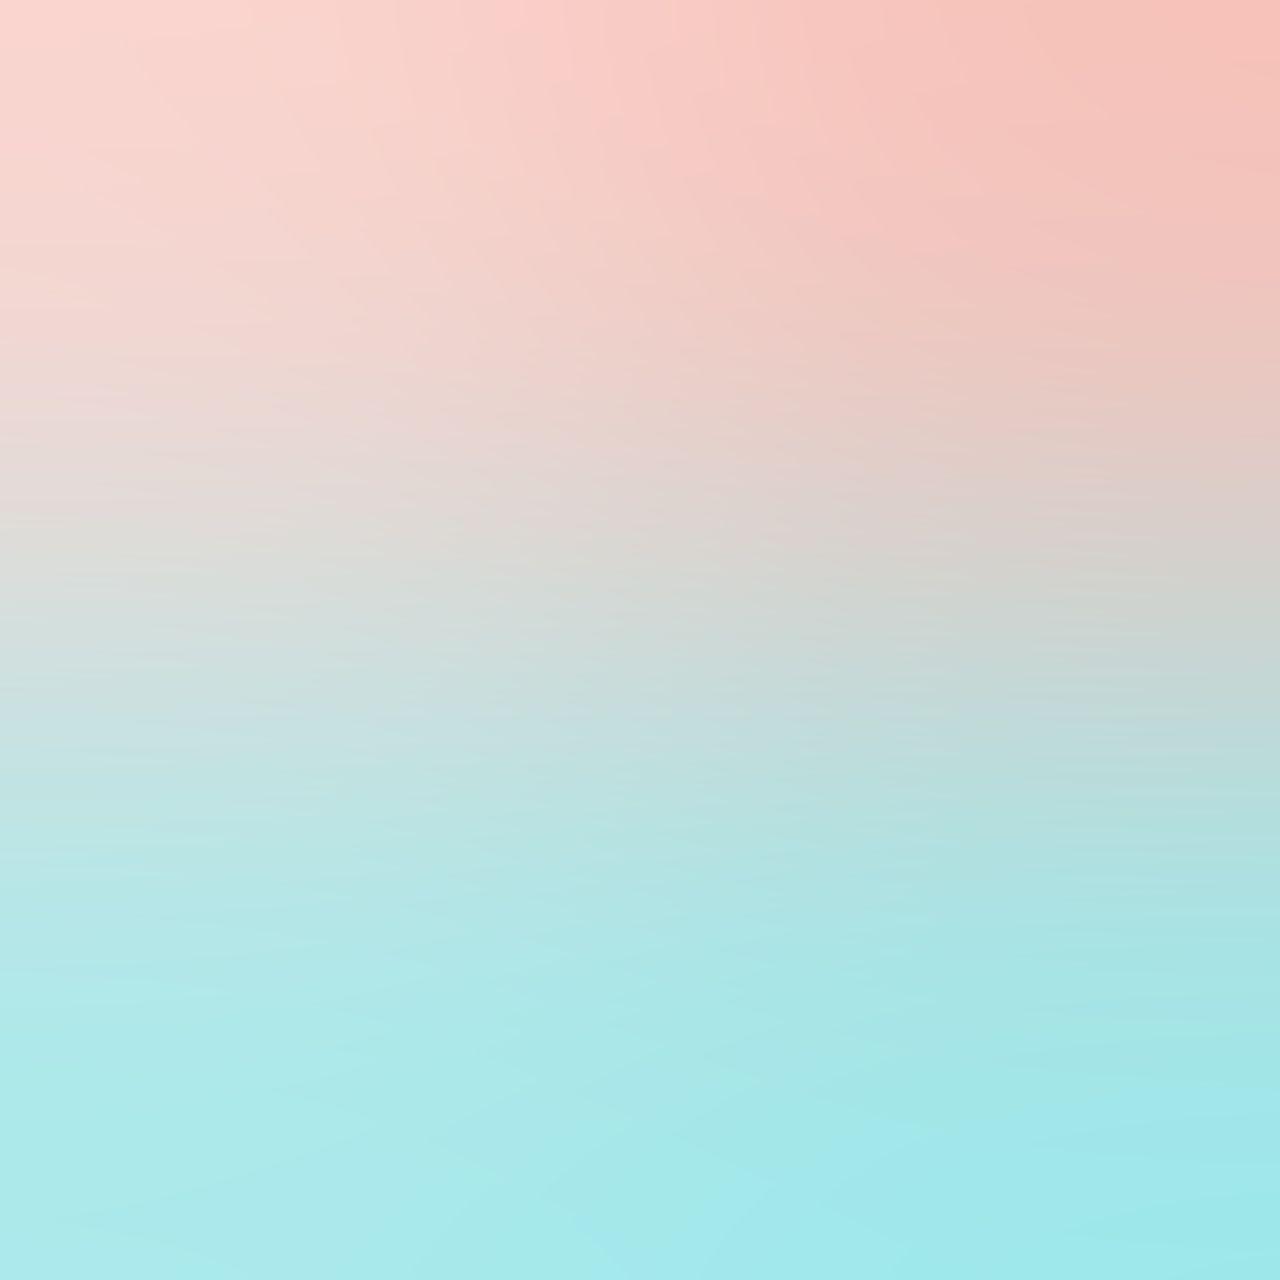 Home Design, Pastel Colors Background Tumblr Style Large